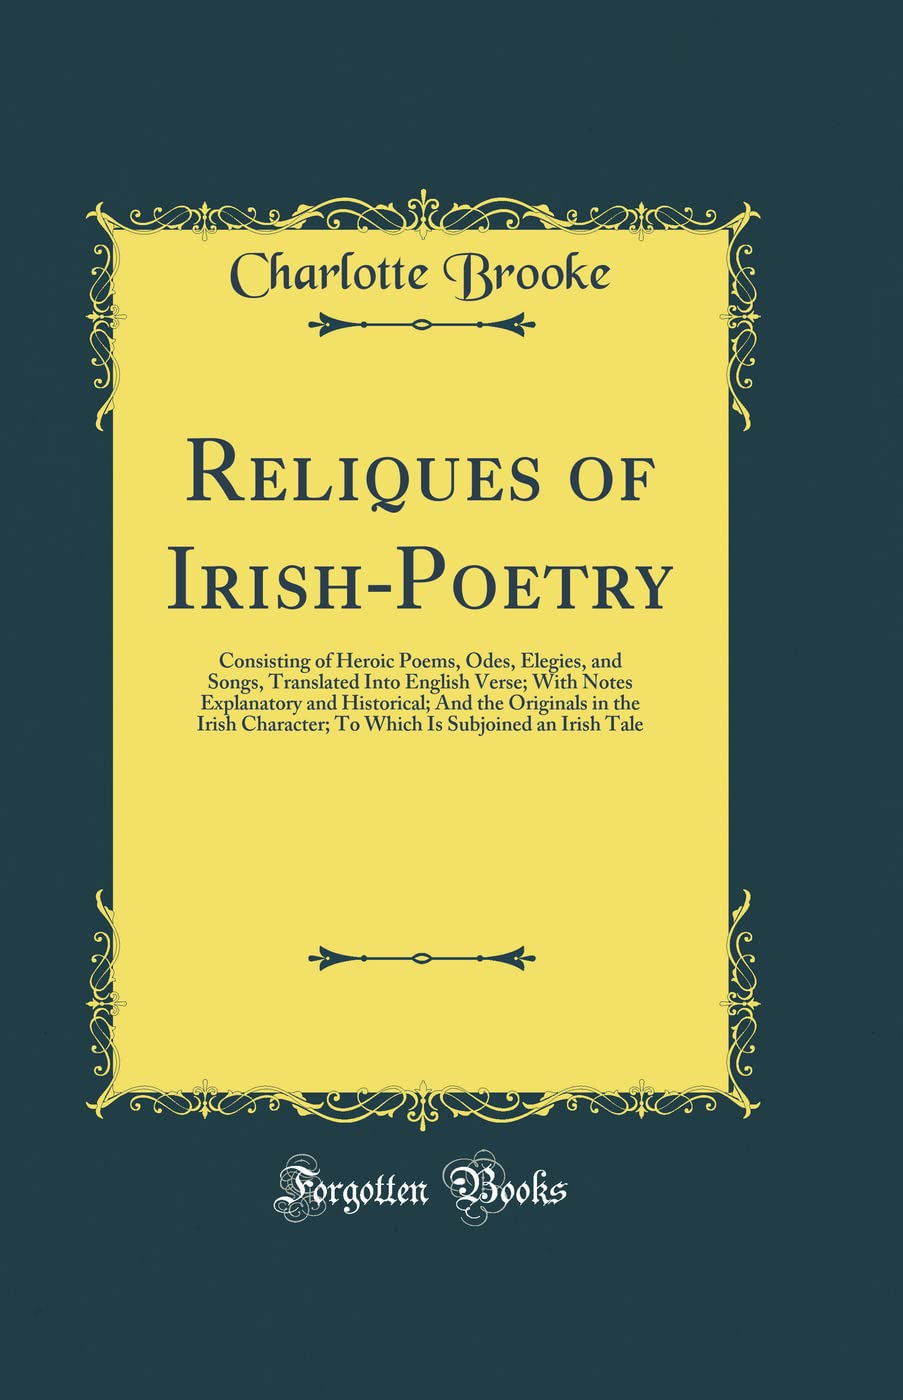 Charlotte Brooke, author of Reliques of Ancient Irish Poetry, dies